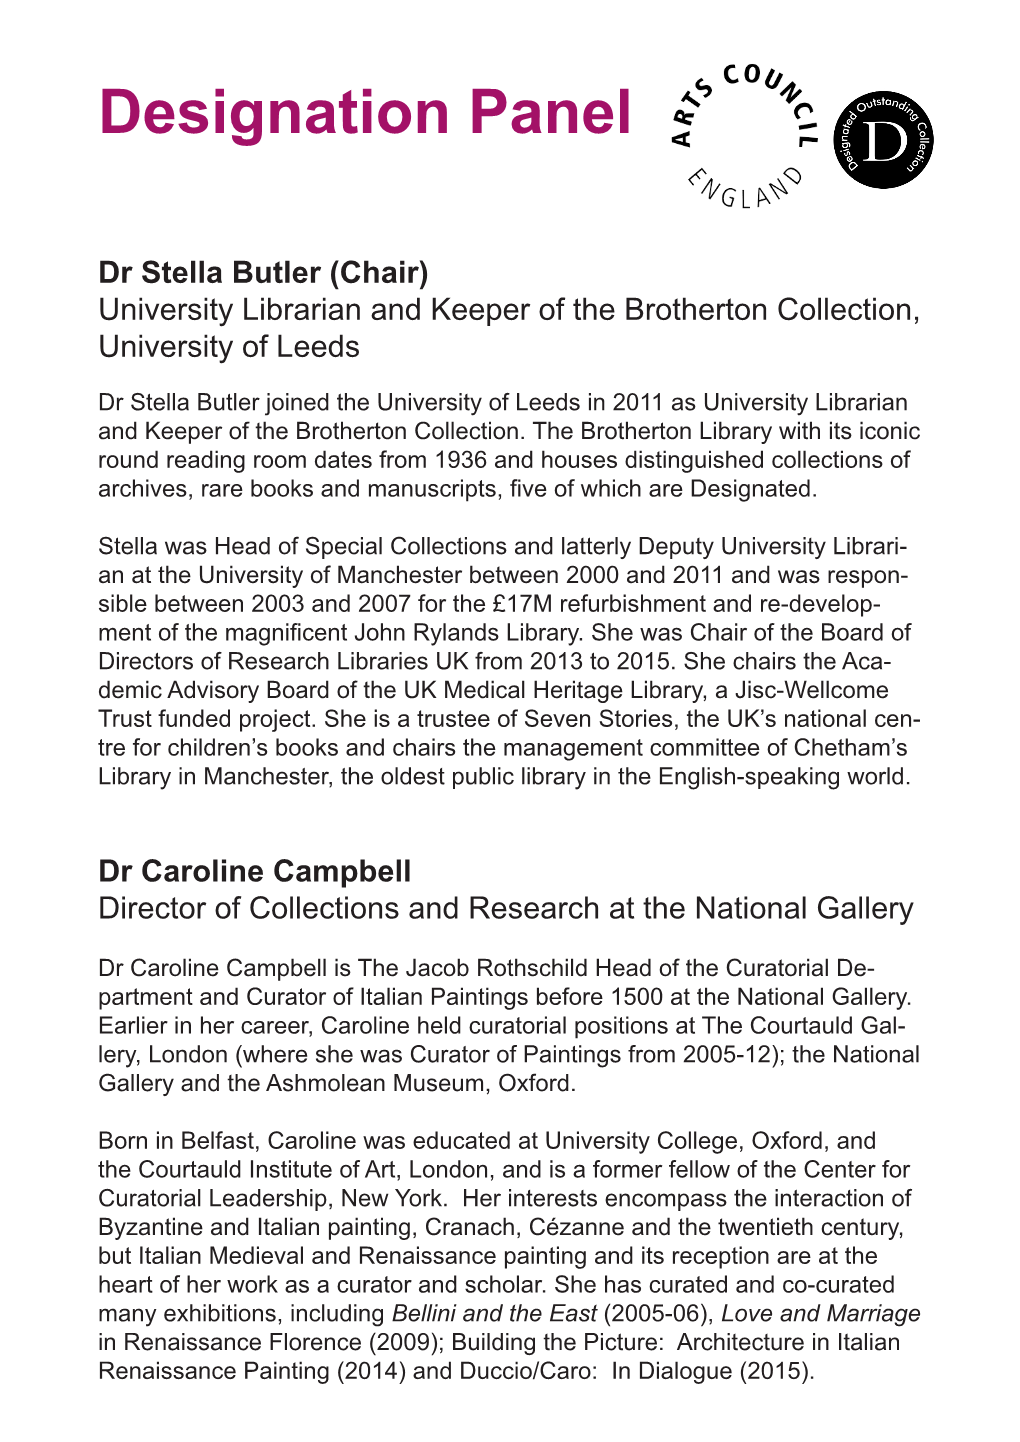 Dr Caroline Campbell Director of Collections and Research at the National Gallery